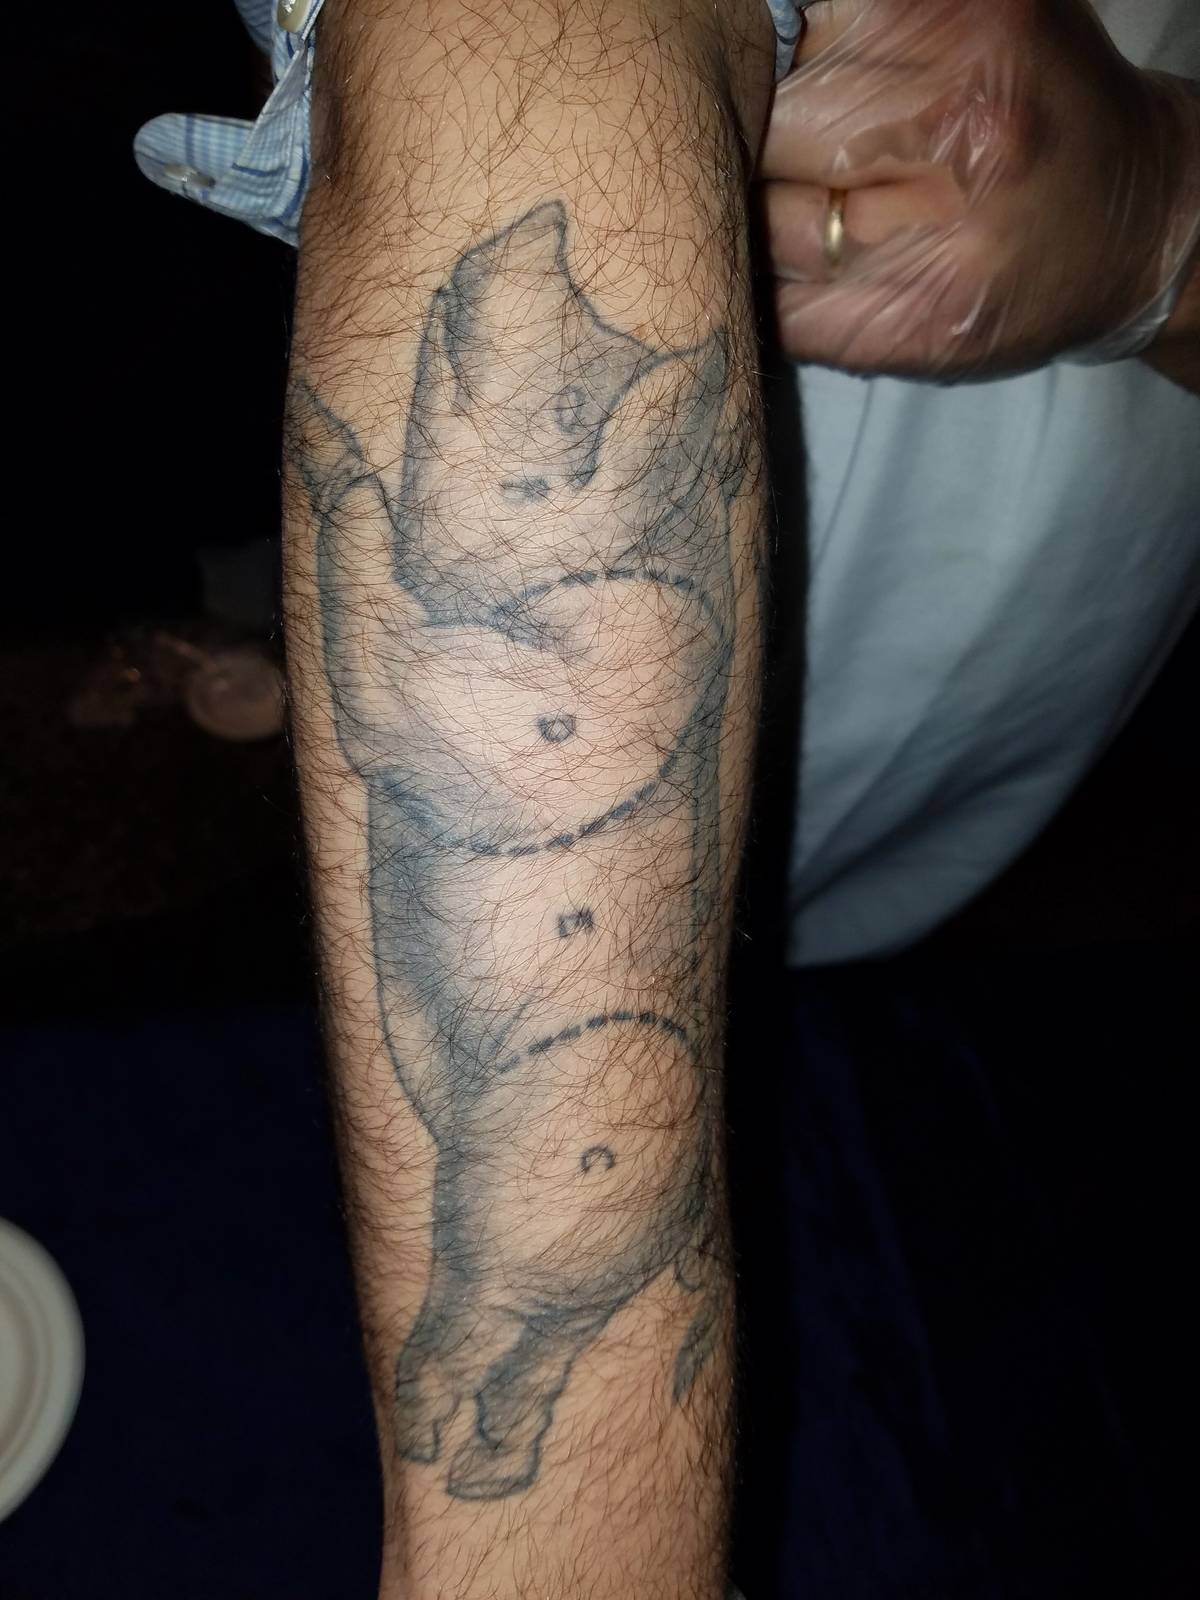 Peter Shelsky’s arm tattoo. (Image: author)